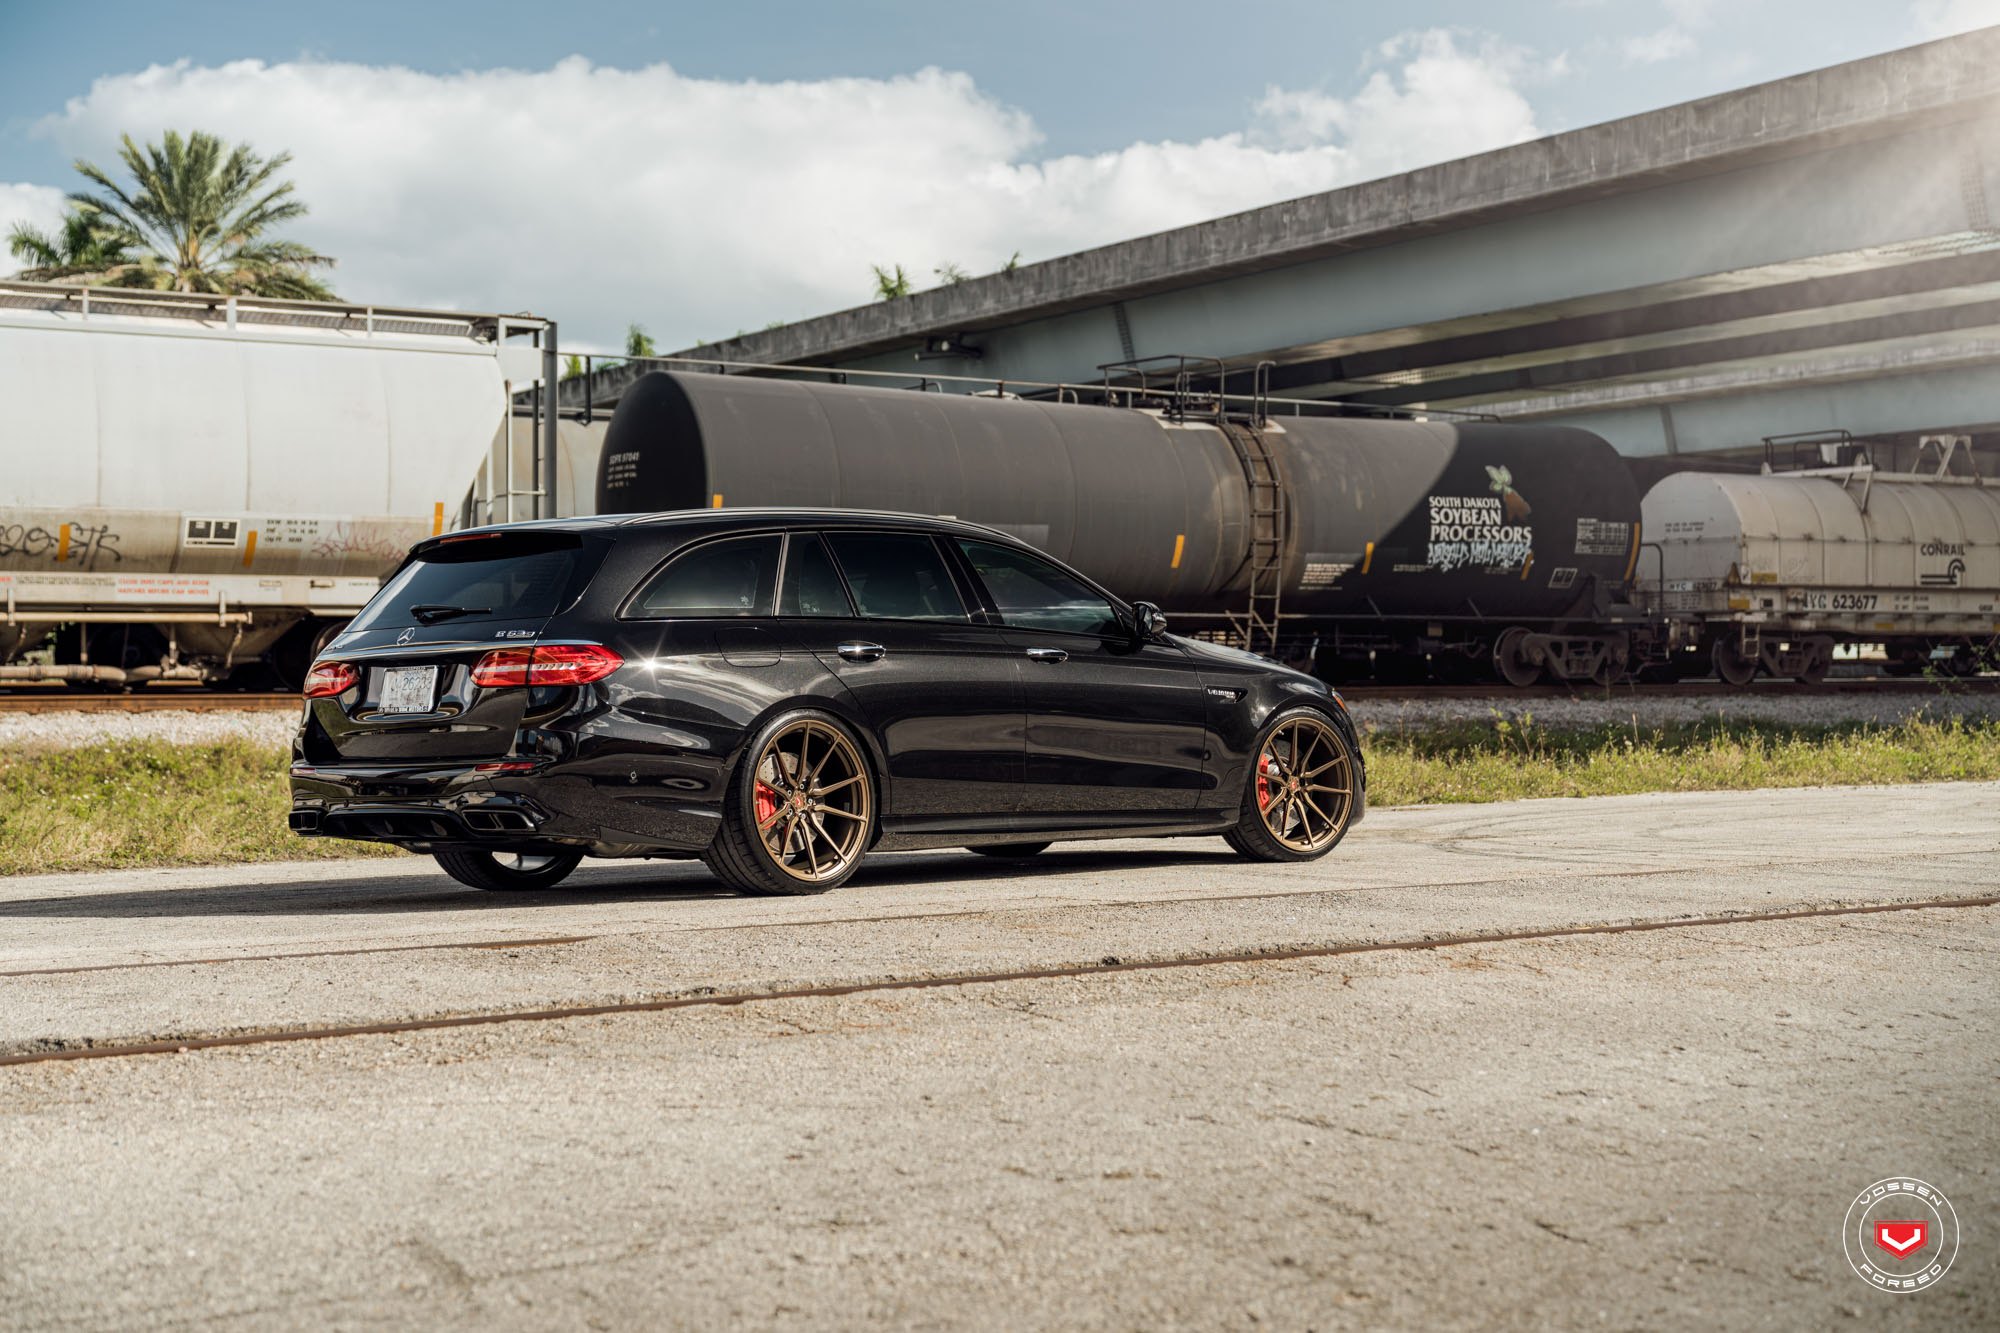 Black Mercedes E Class with Custom Rear Diffuser - Photo by Vossen